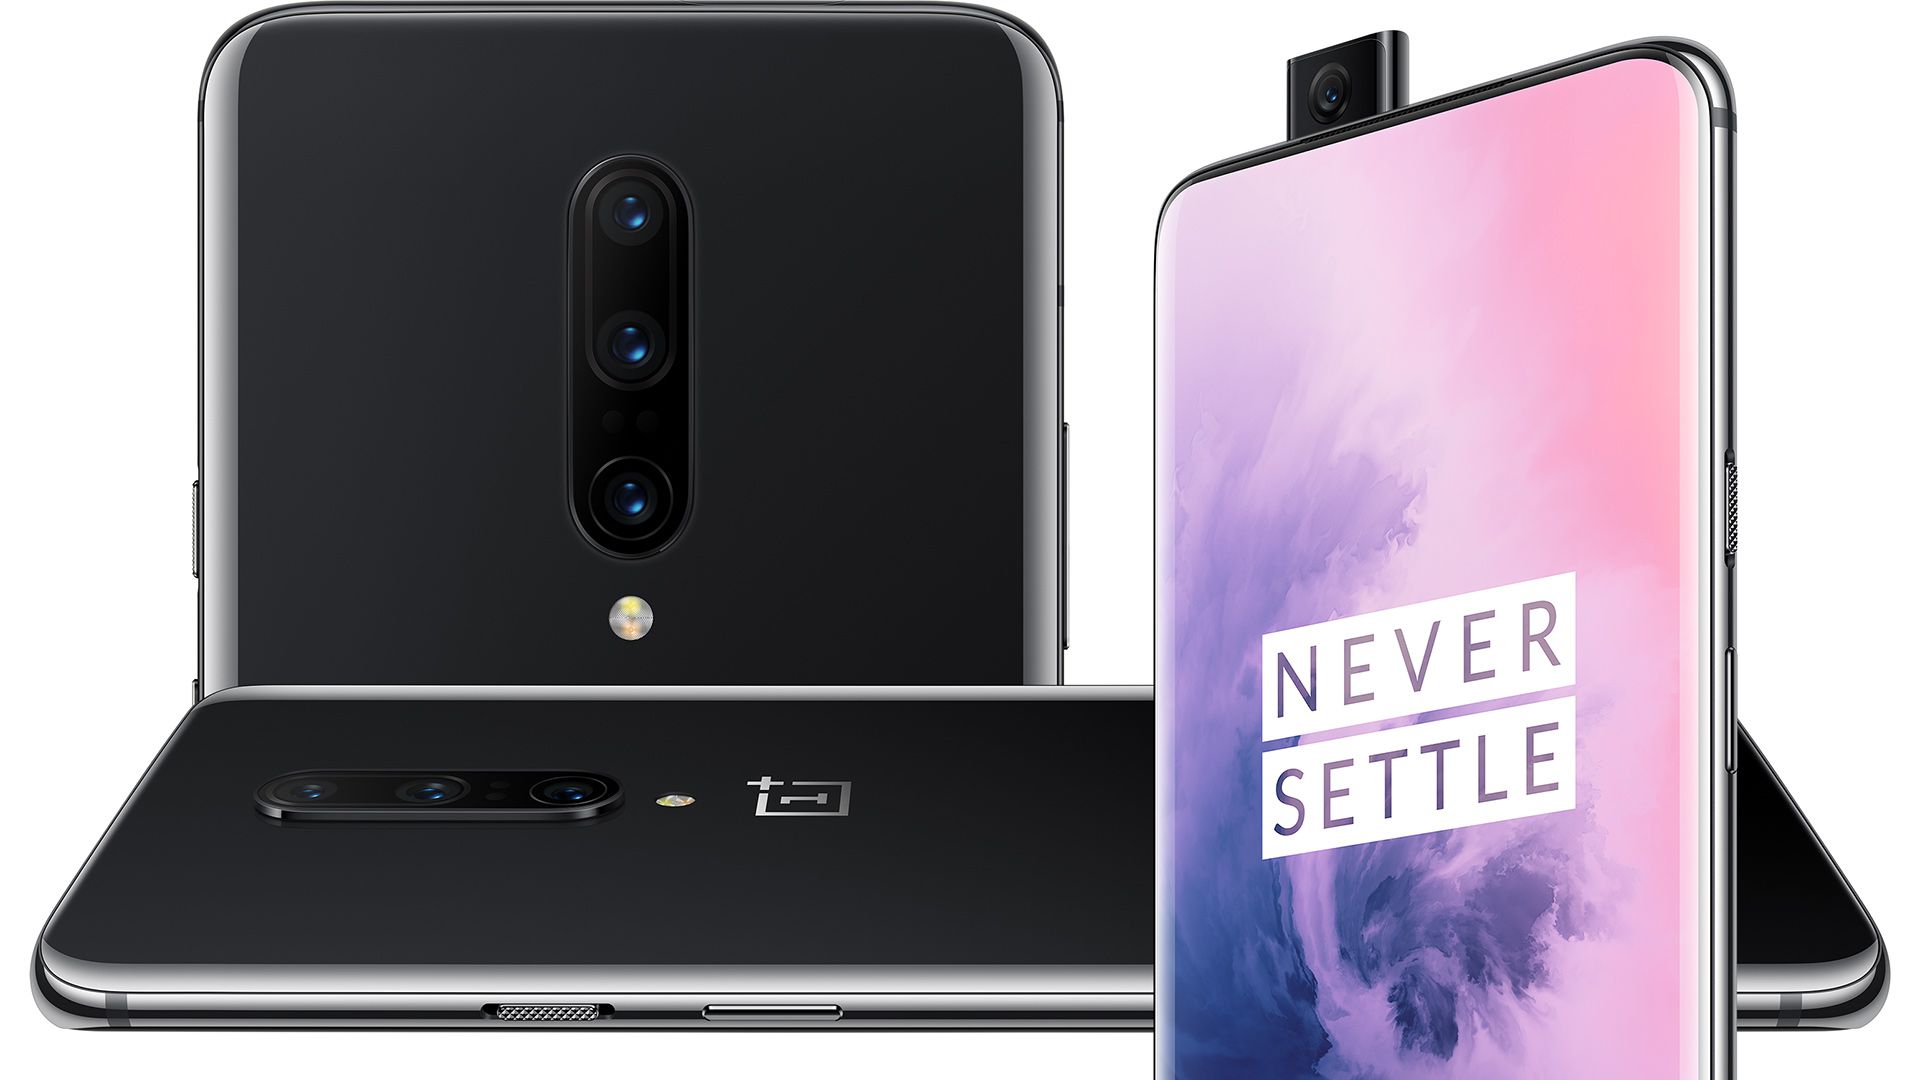 OnePlus 7 Pro may get Always-On display, wide-angle videos and more